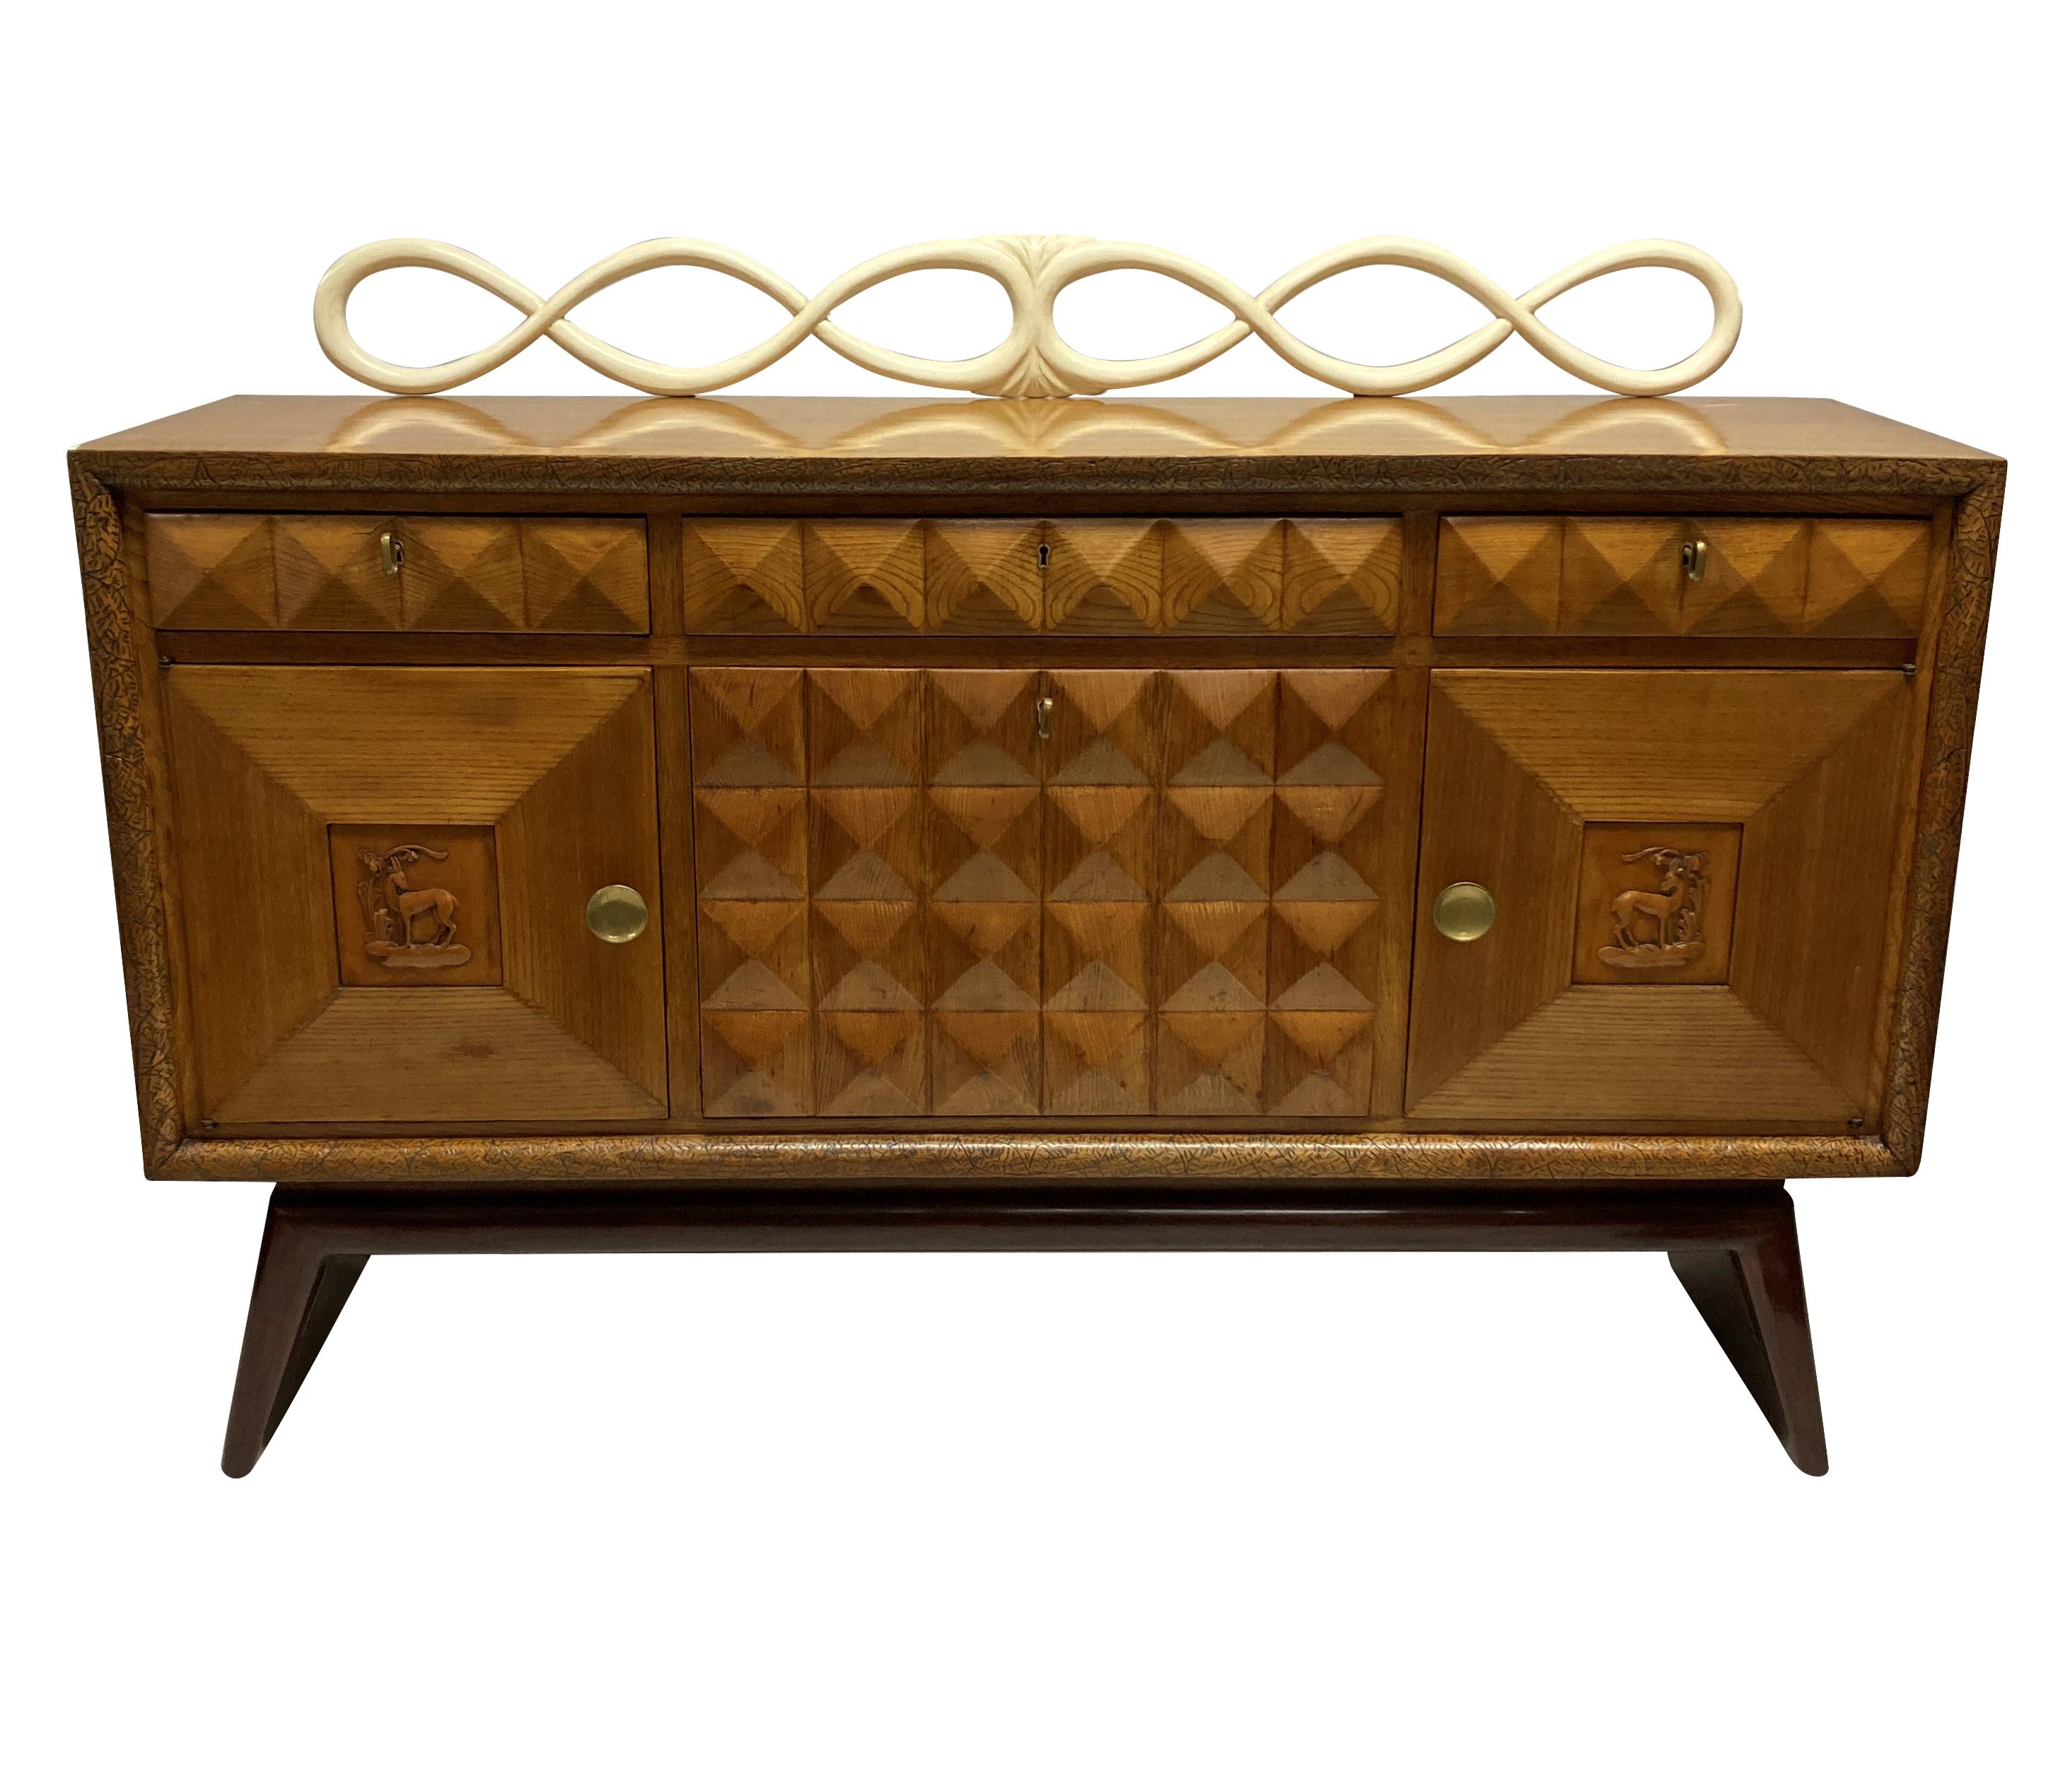 A fine Italian bar credenza by Pier Luigi Colli. In oak, elm and lemon wood, comprising a central fall front bar cabinet, with cupboards and drawers. It has wonderful texture, with a diamond pattern throughout and a faux ivory decorative rail to the